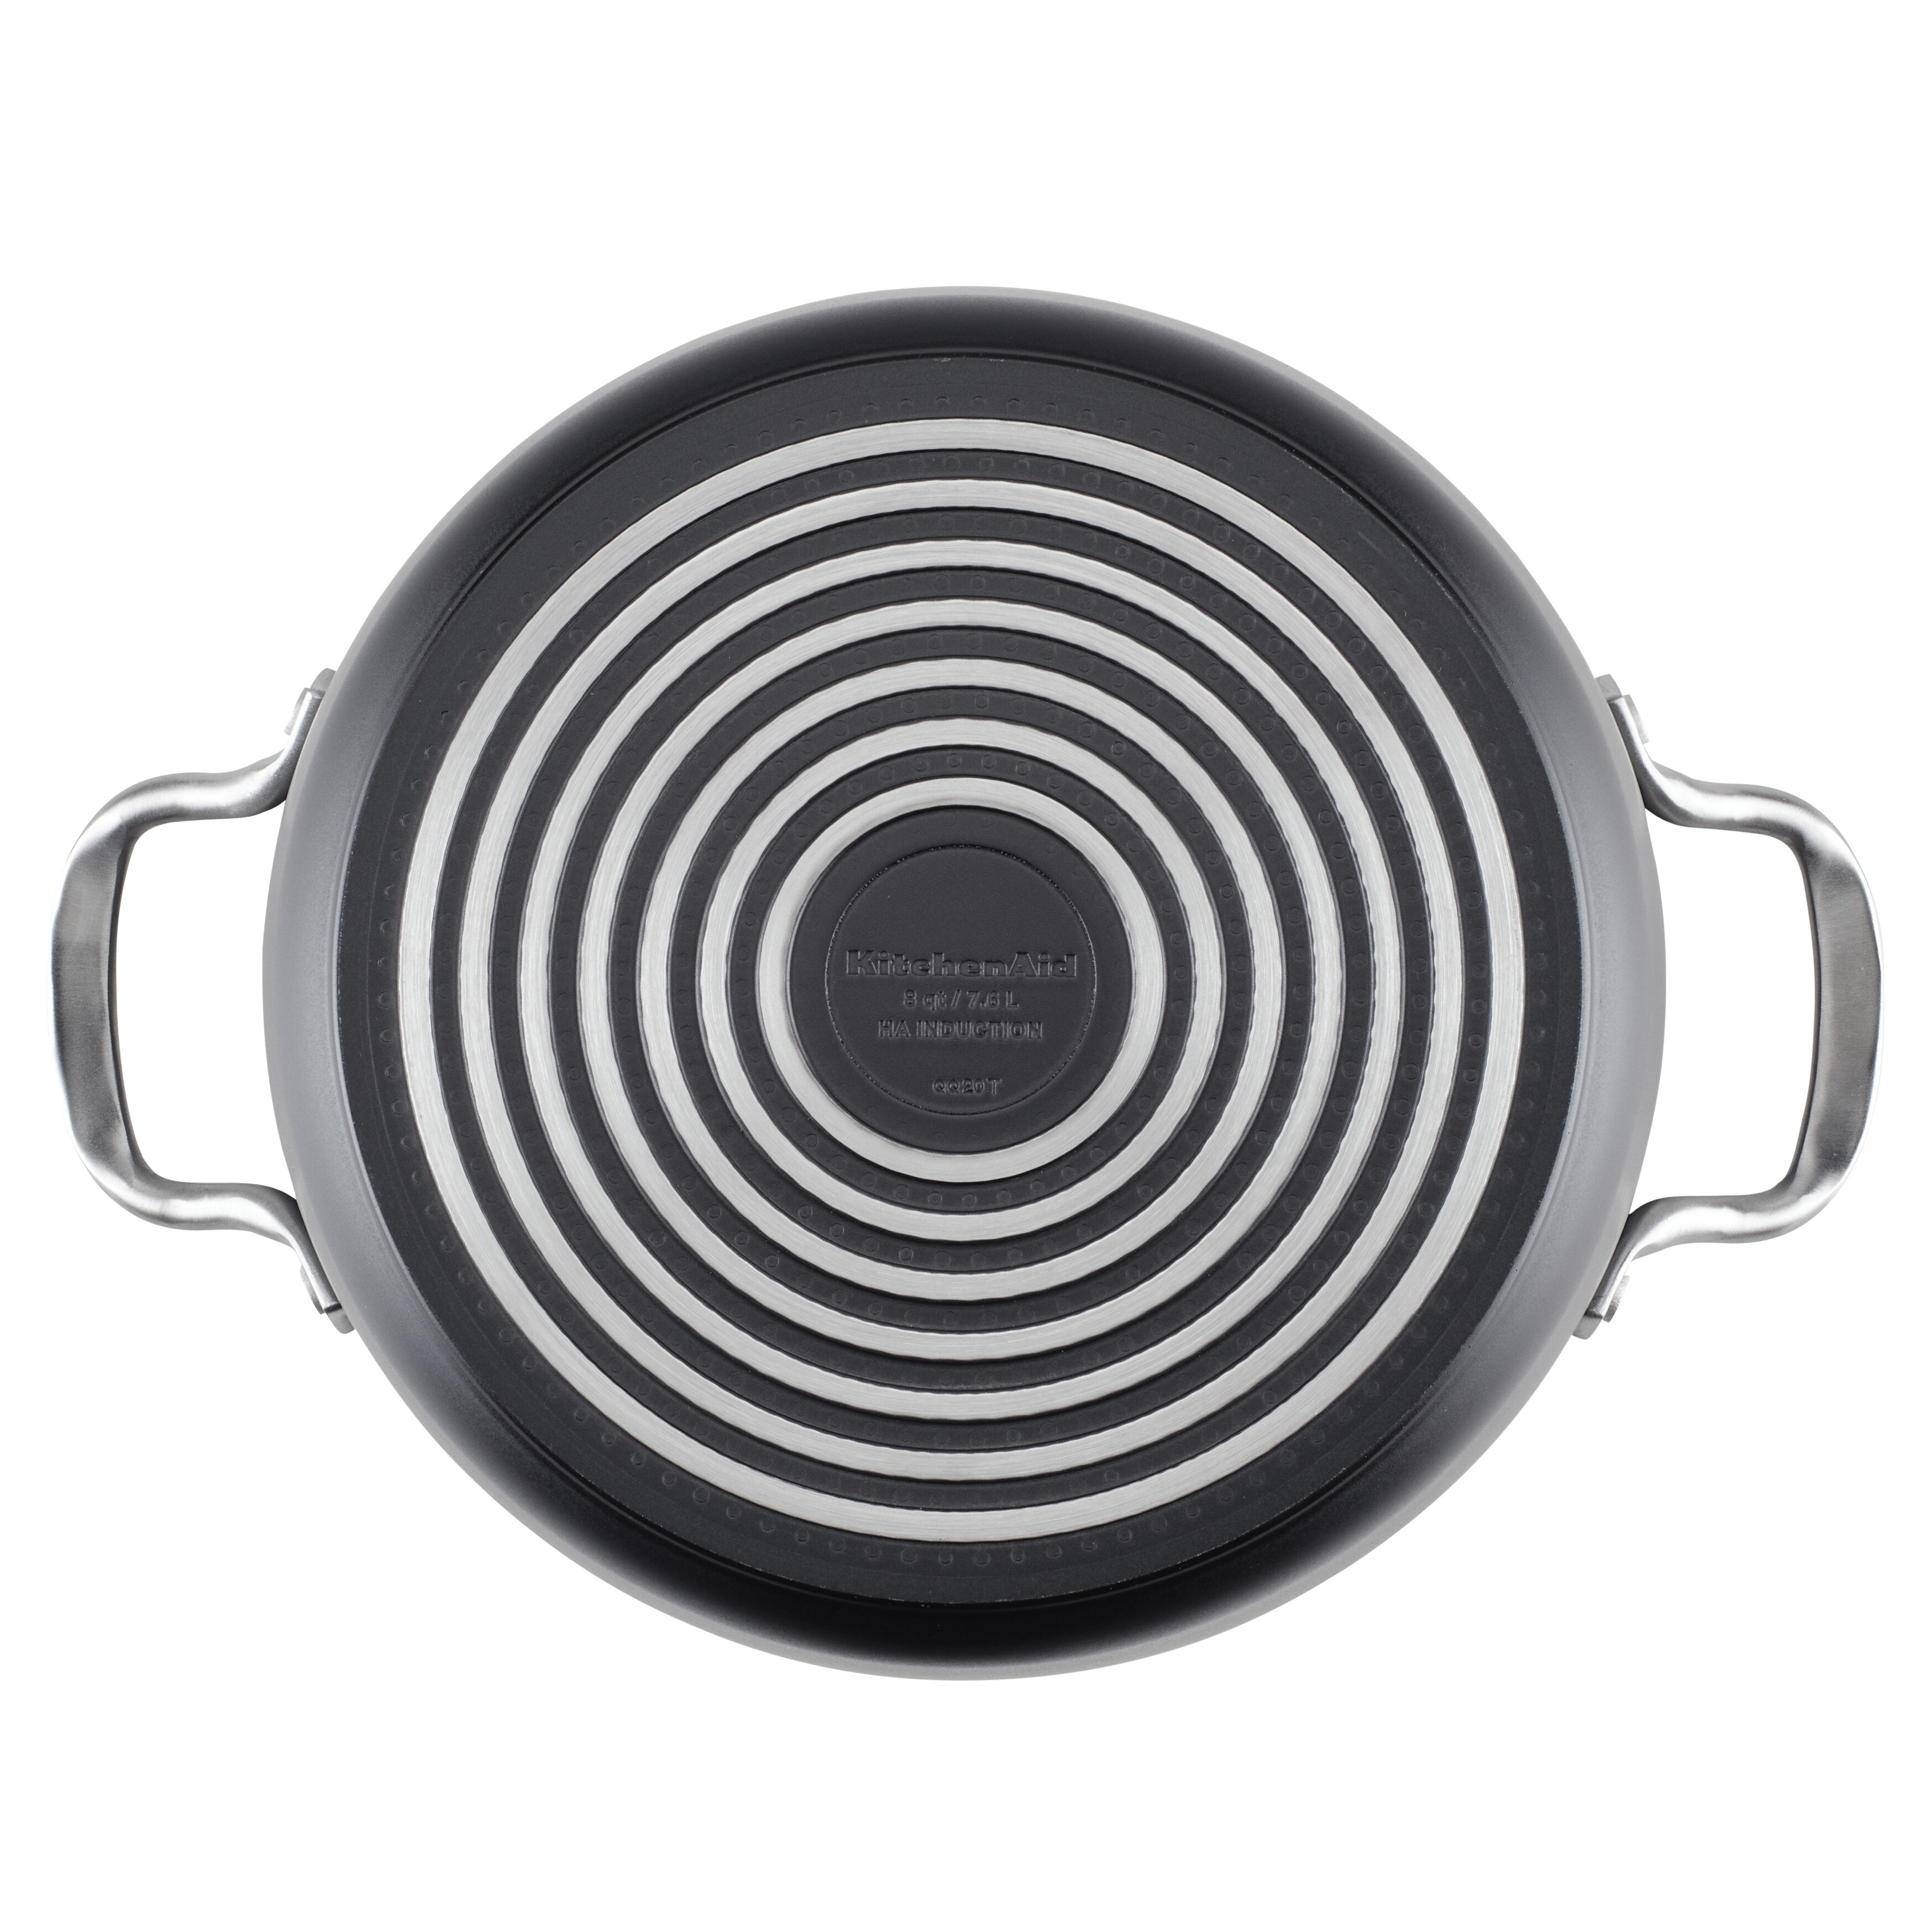 https://ak1.ostkcdn.com/images/products/is/images/direct/05661c777c6c1fb56e111f7b6210c0b0e330f976/KitchenAid-Hard-Anodized-Induction-Nonstick-Stockpot-with-Lid%2C-8-Quart%2C-Matte-Black.jpg